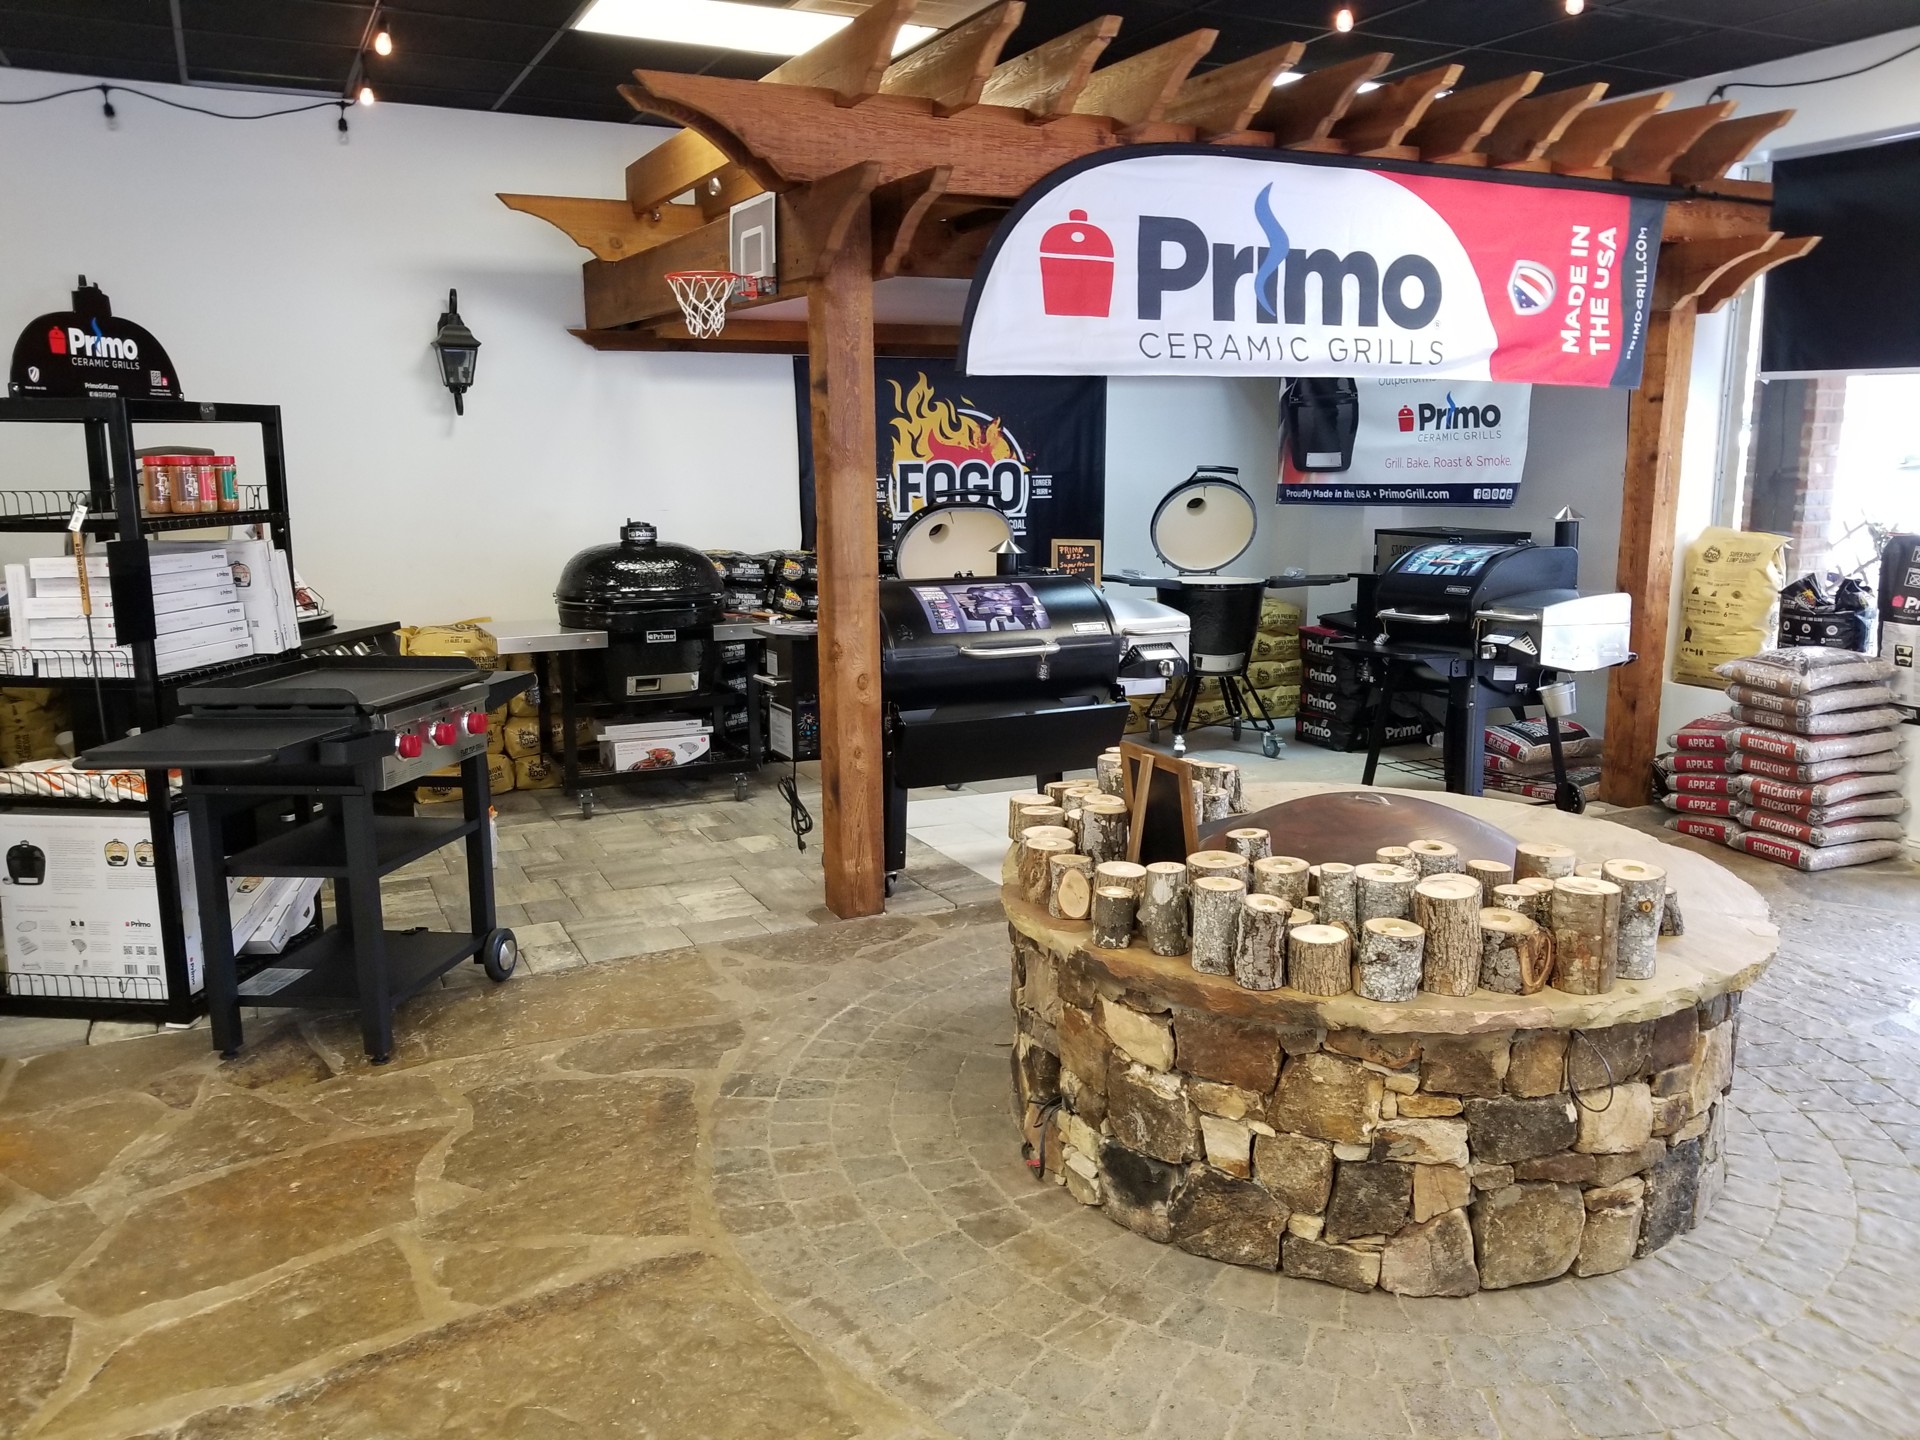 Primo grill at our show room